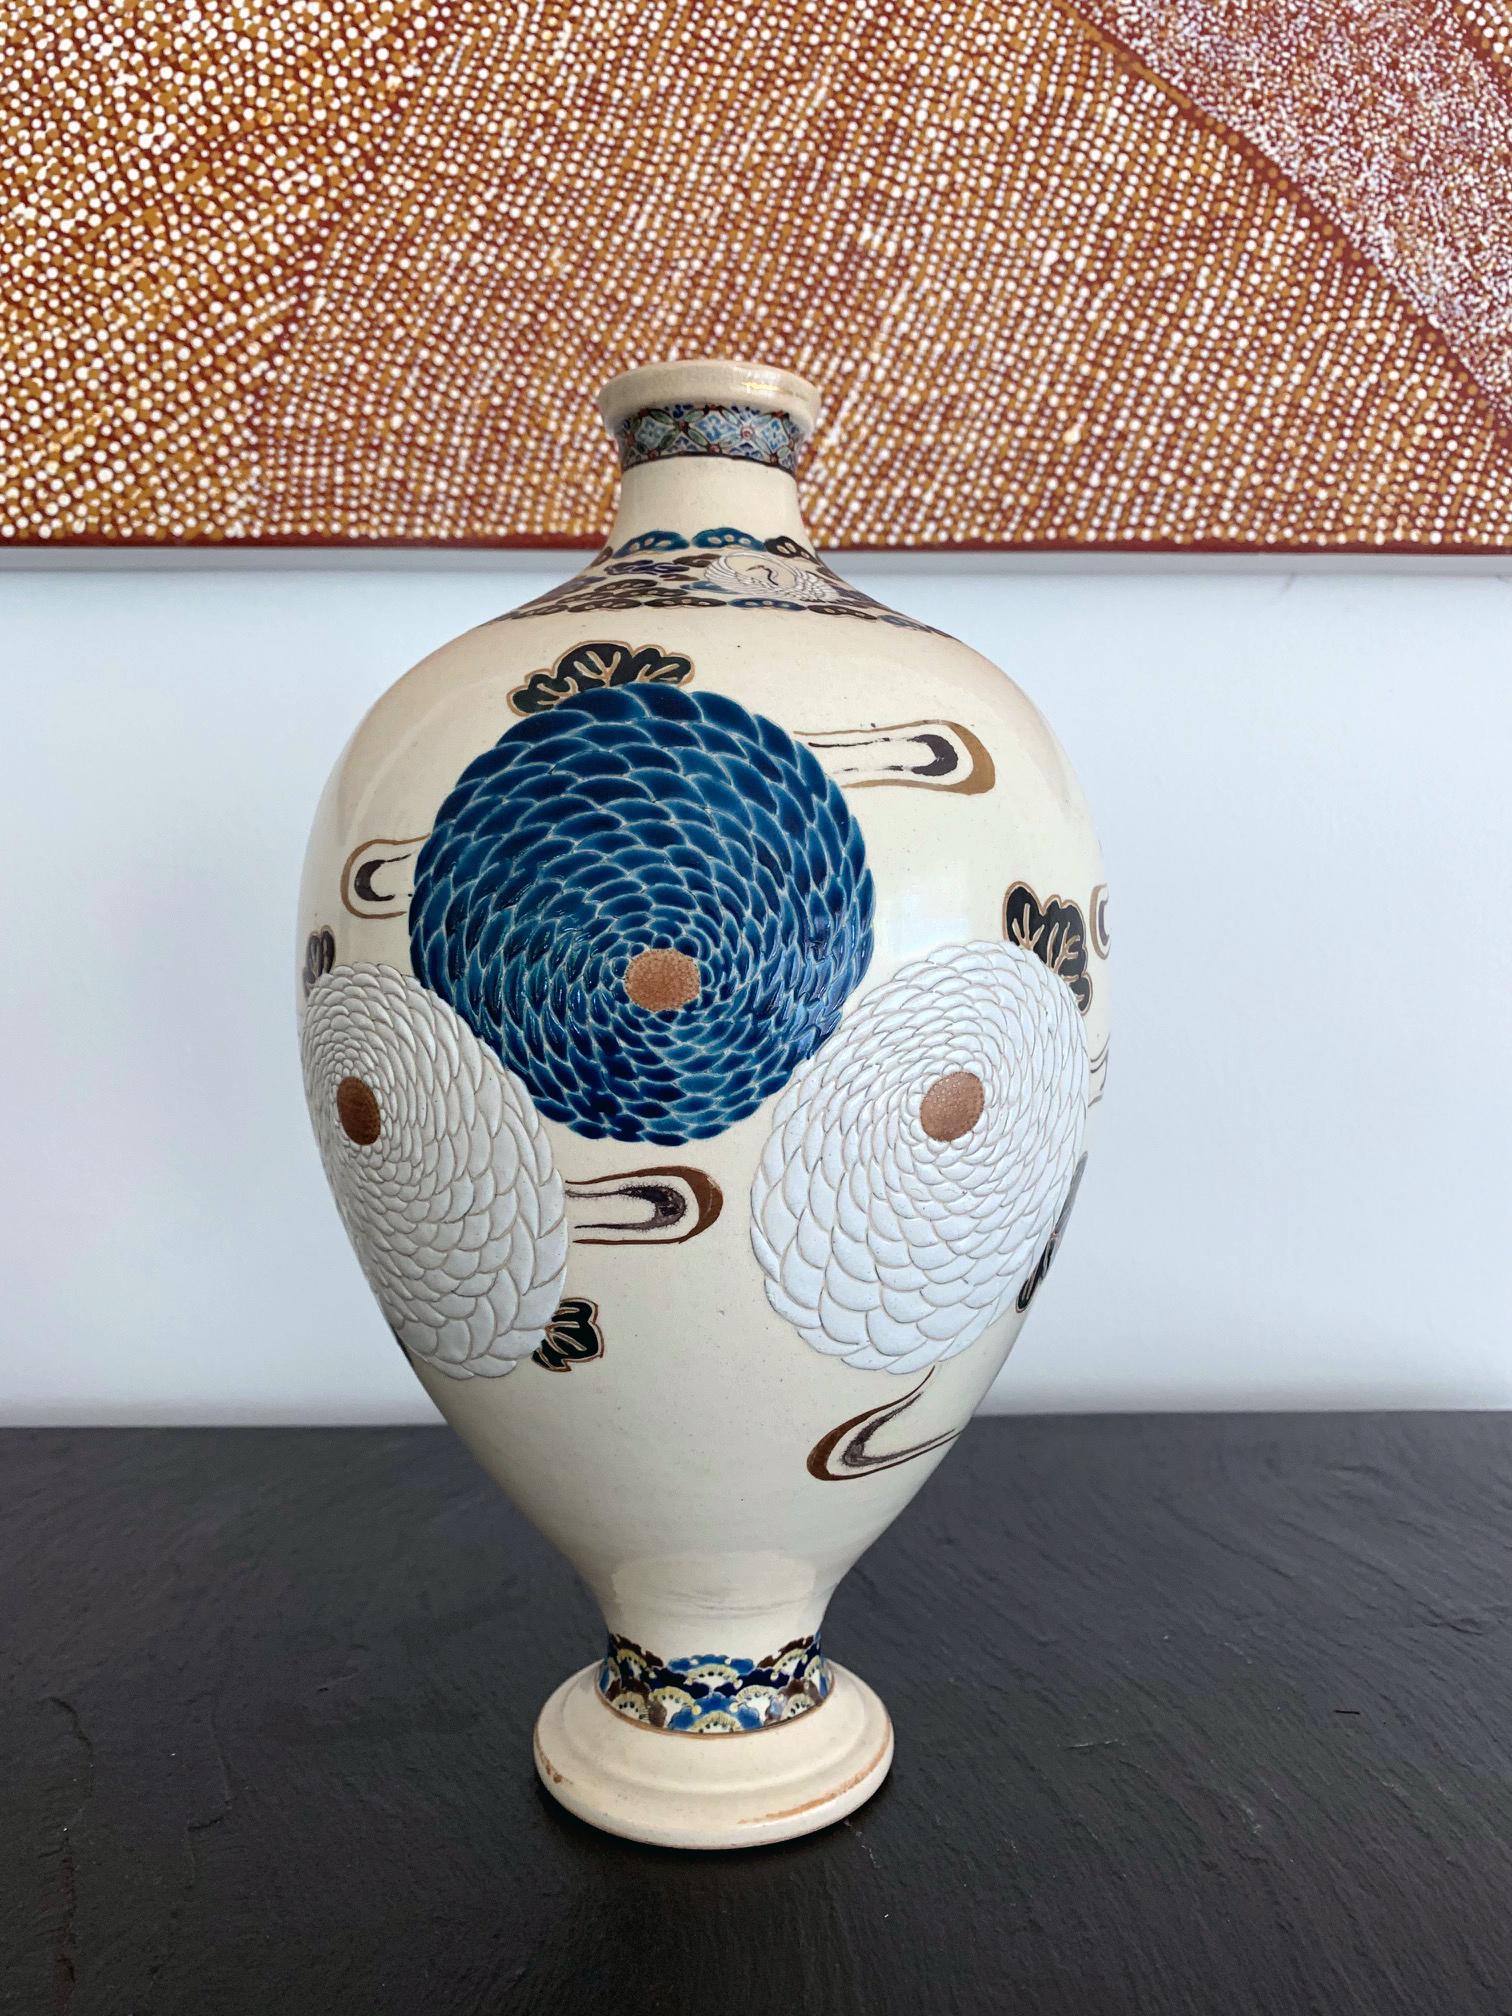 A ceramic vase in an elegant form and fine over glaze decoration. Japanese Satsuma ware that was likely made in Kyoto circa late 19th century. The vase was finely decorated with low relief carving depicting bundles of pompon chrysanthemums in white